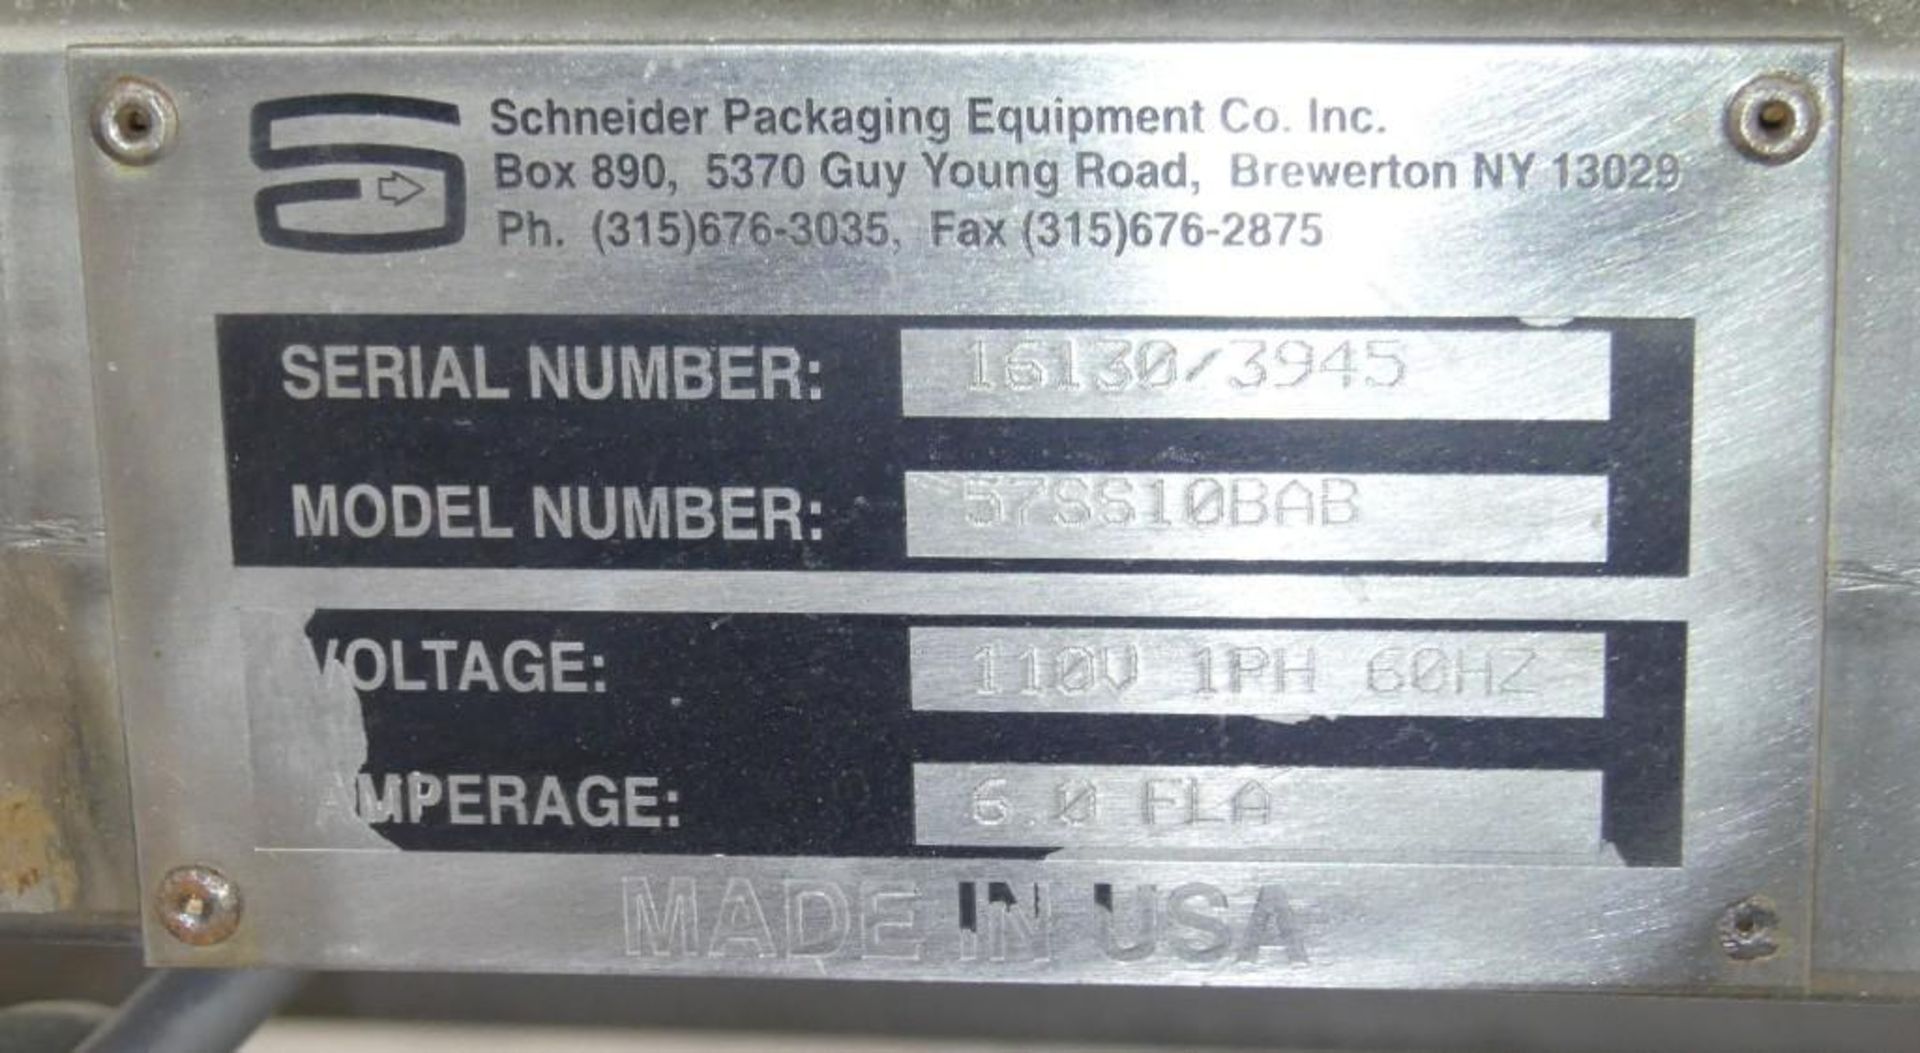 Schneider Packaging Equipment Co. 57SS10BAB with a Goring Kerr Metal Detector - Image 24 of 25